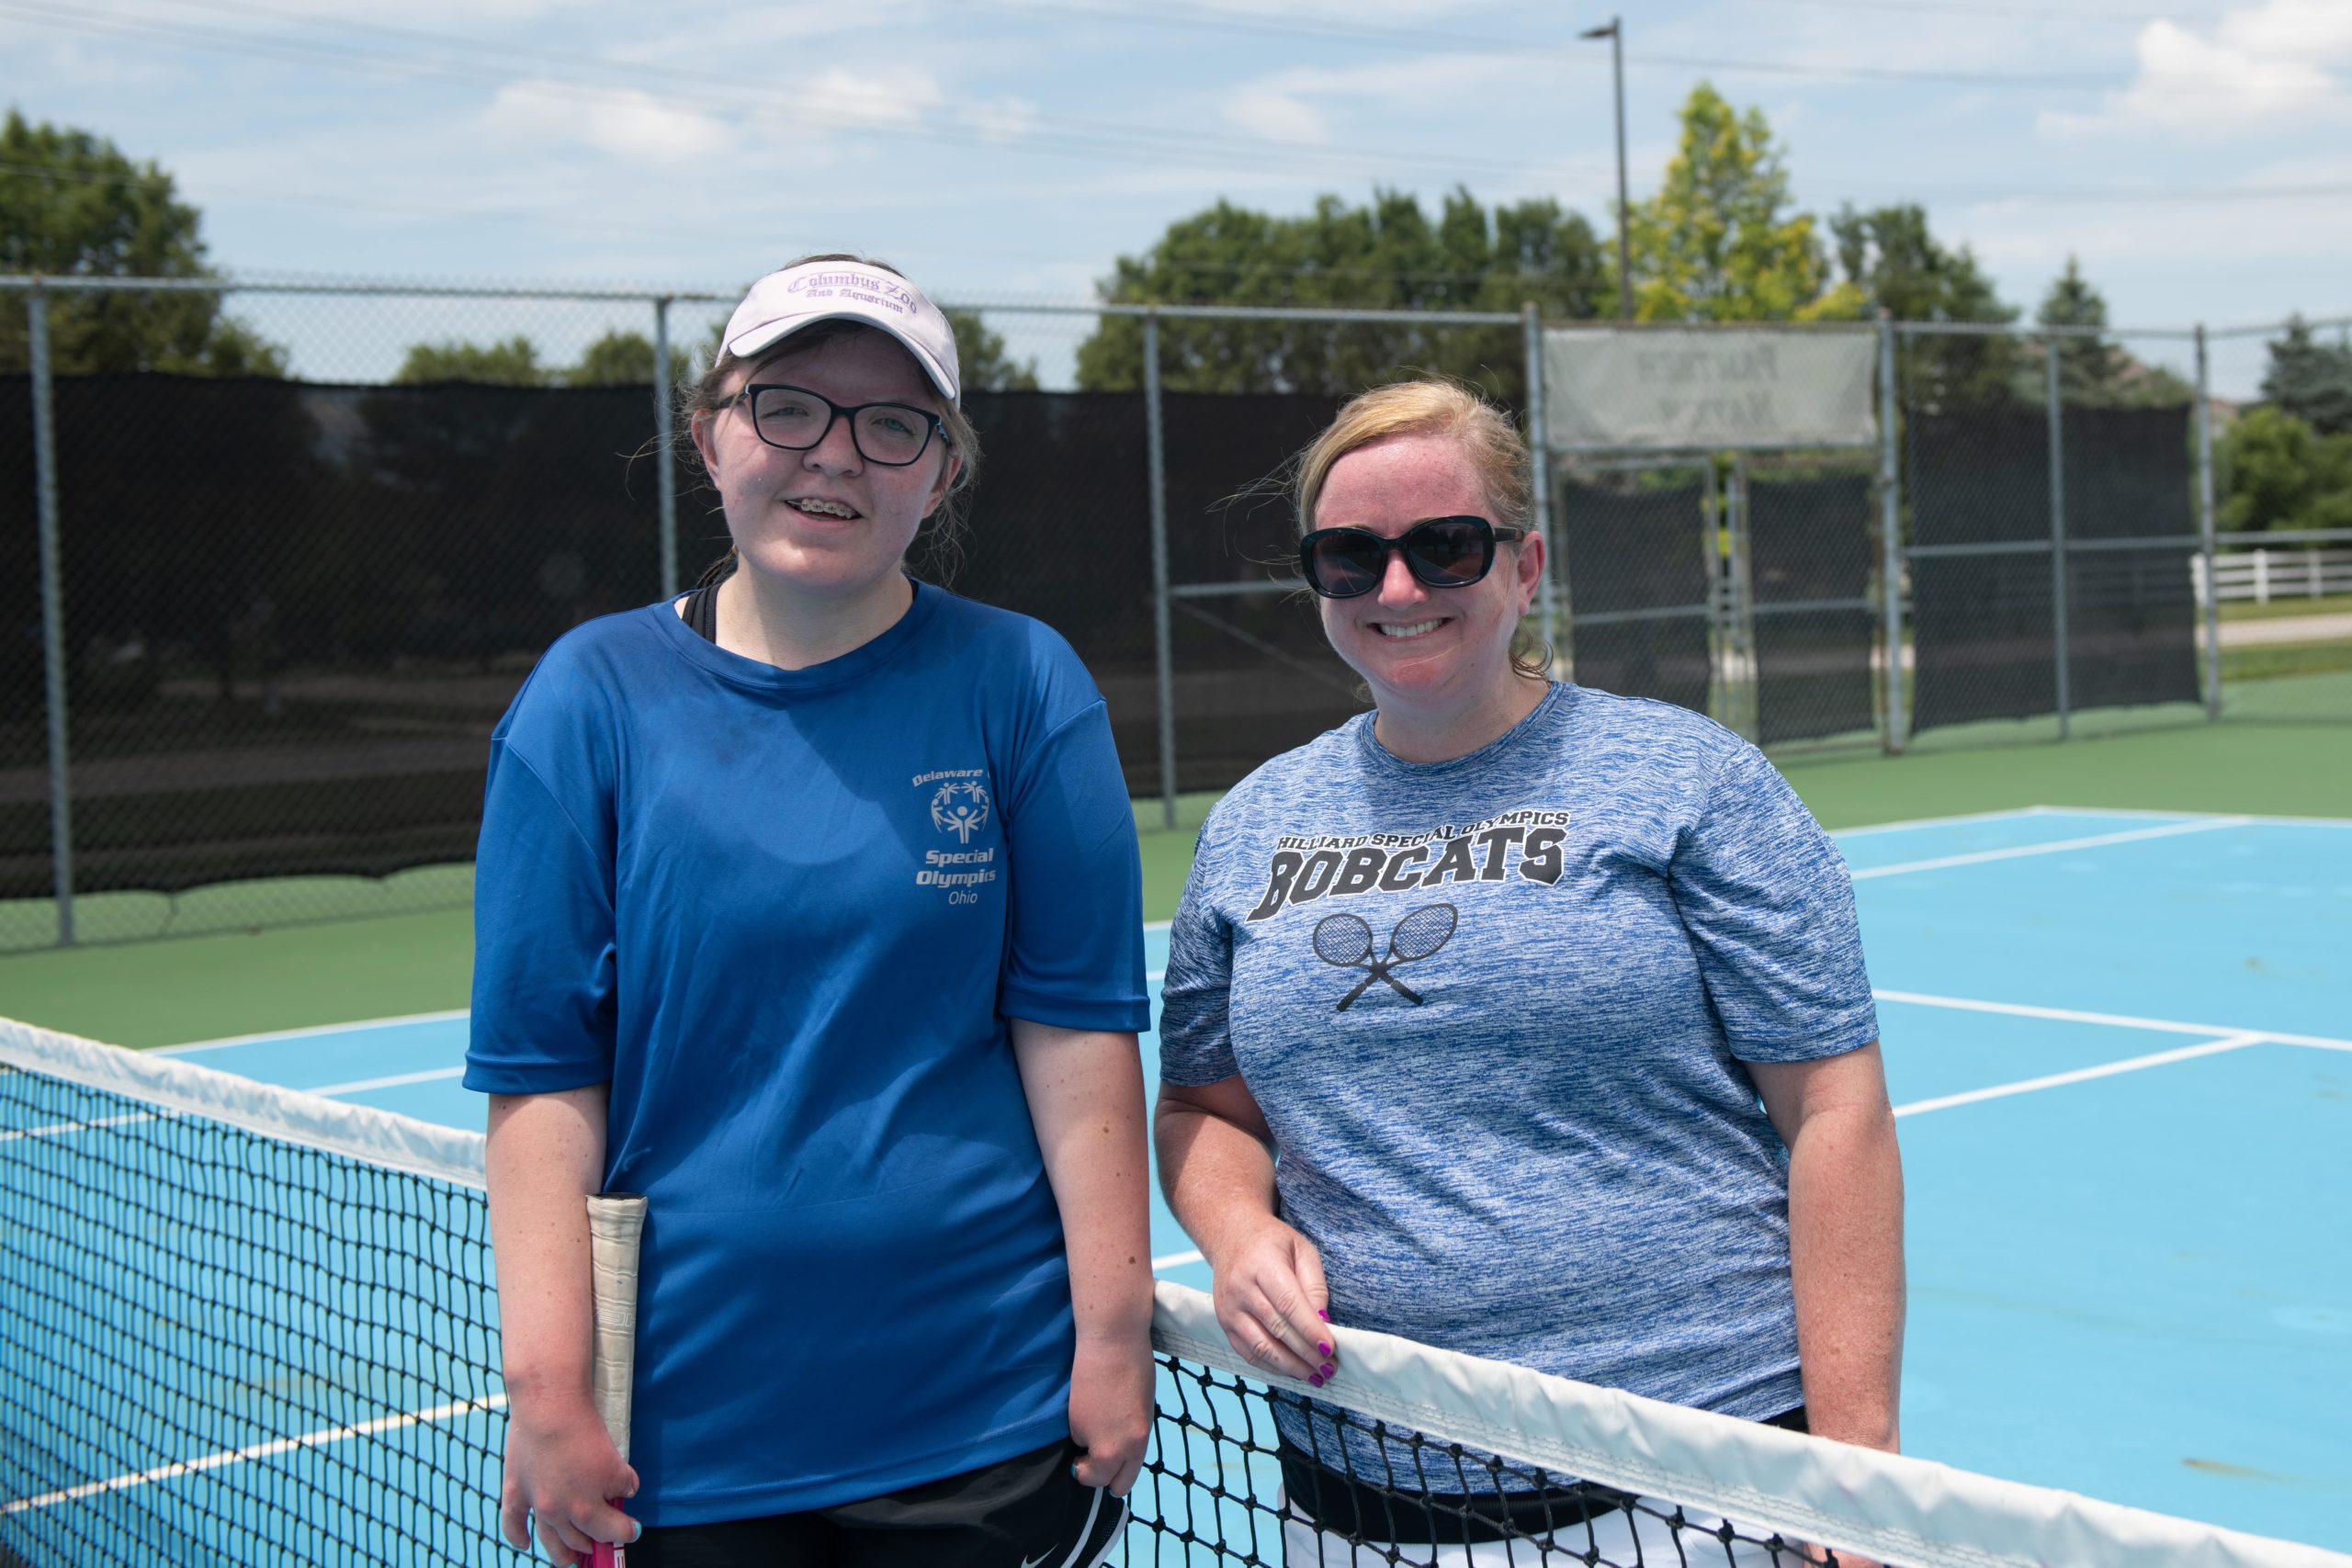 Women on tennis court wearing blue shirts | Unified Champion Schools | Special Olympics Ohio 